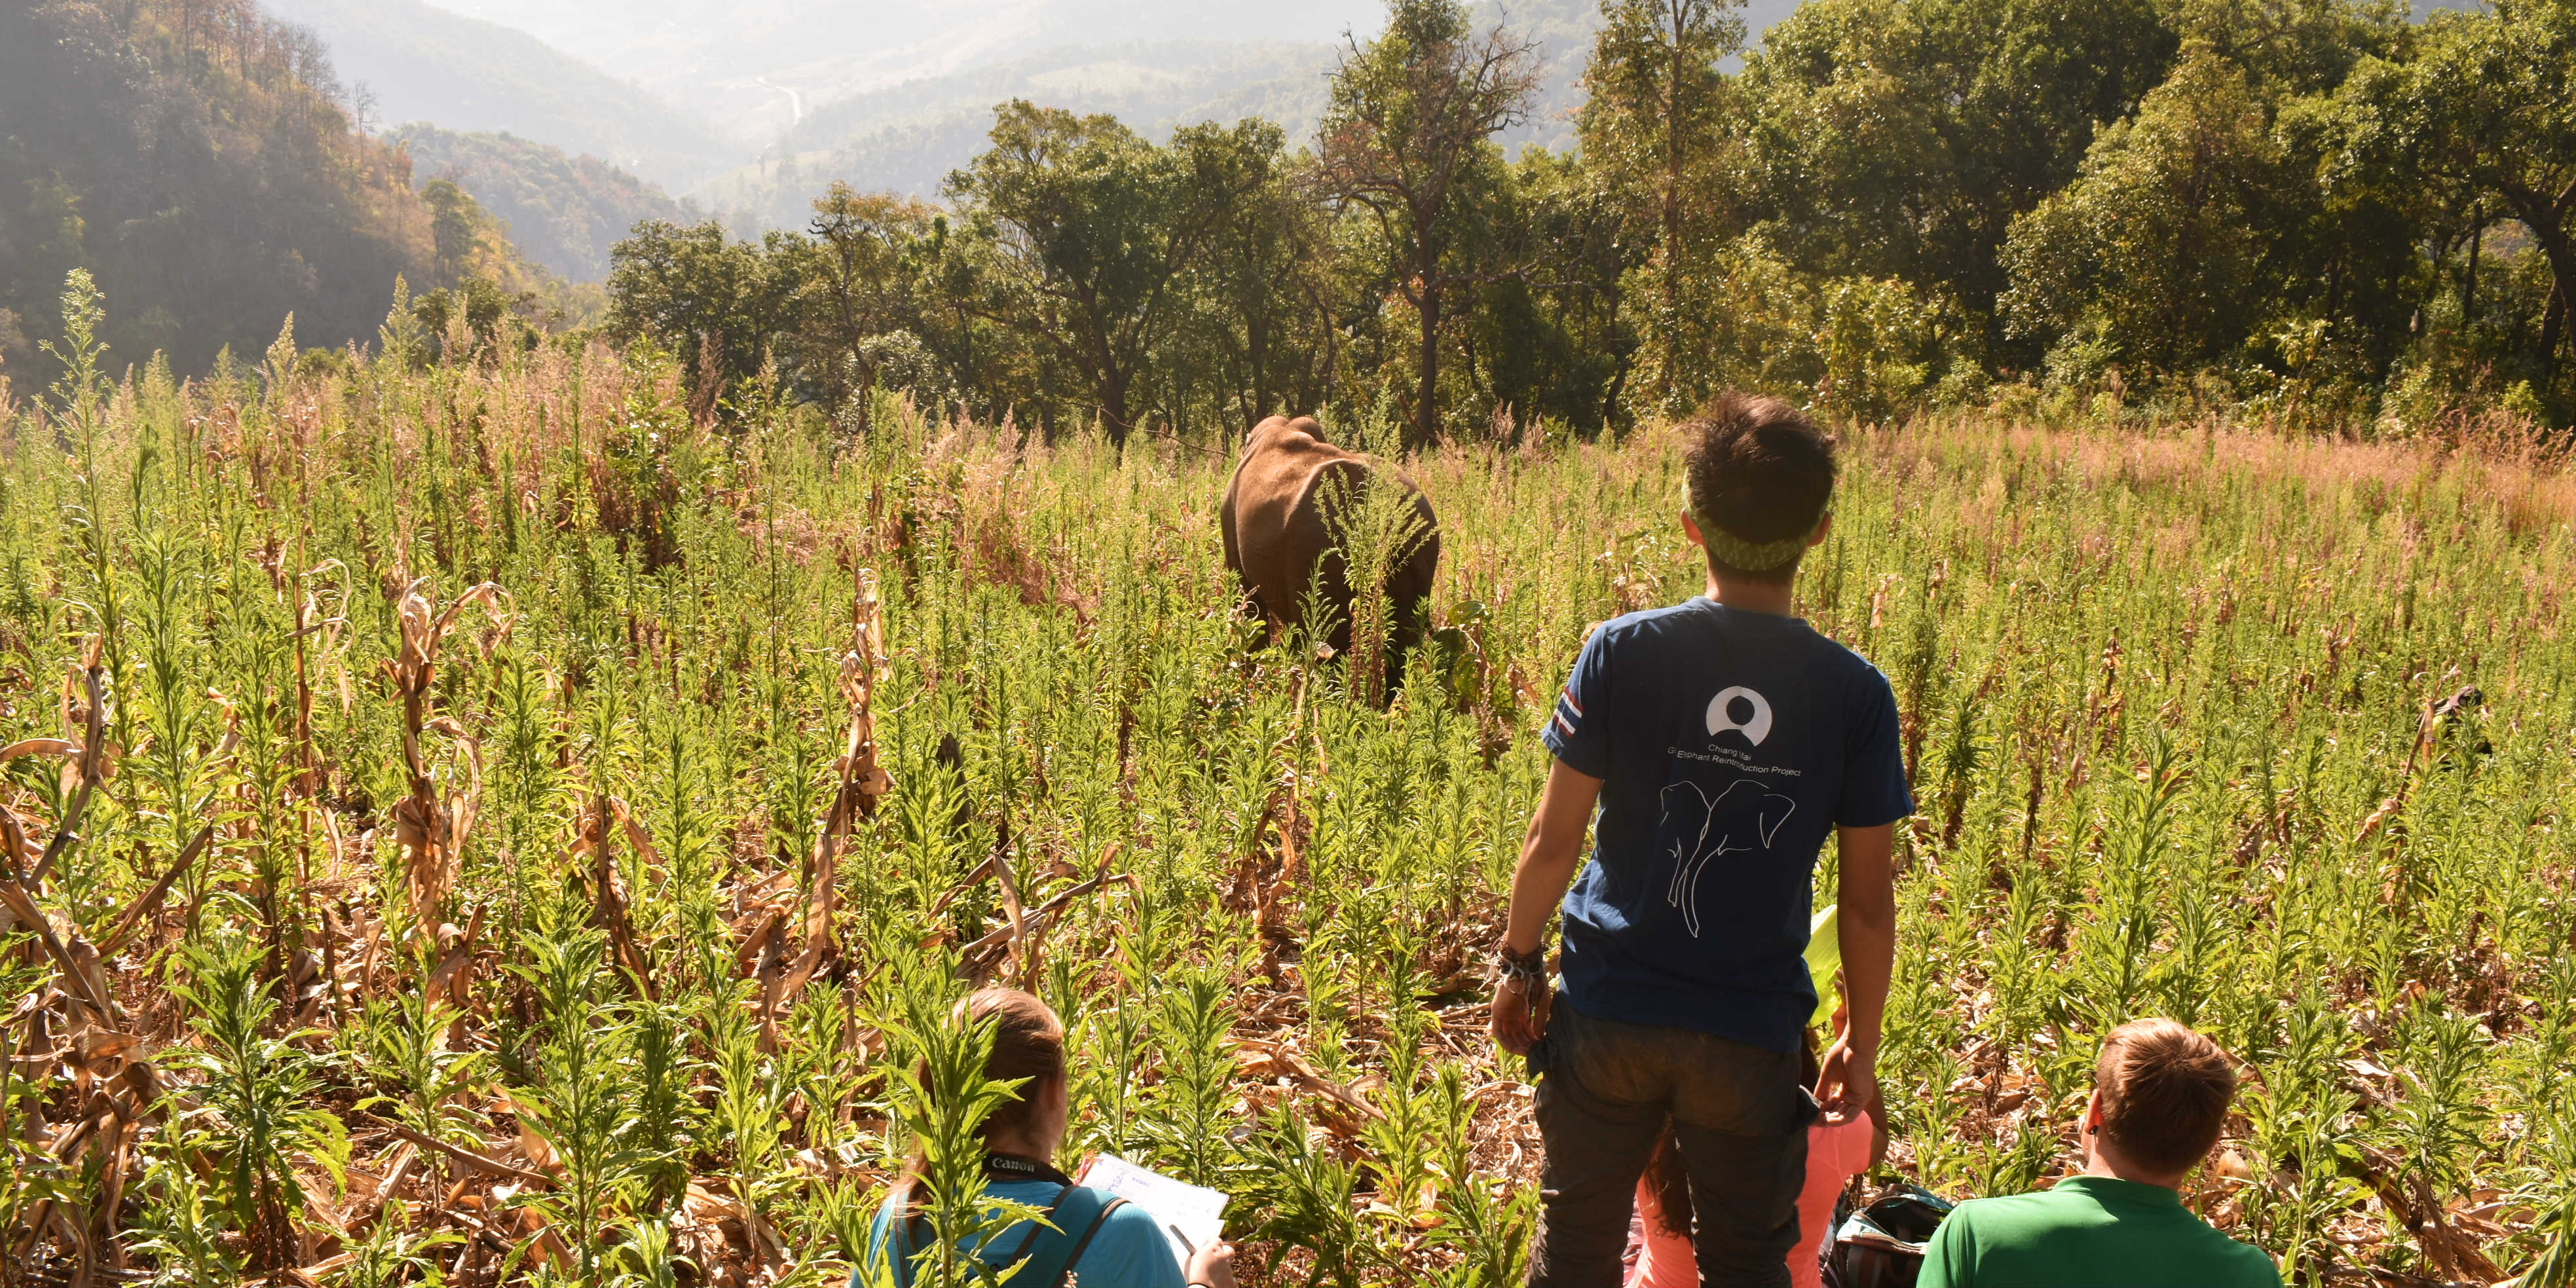 GVI participants monitor elephants in Thailand, as part of efforts to set up alternative elephant tourism.